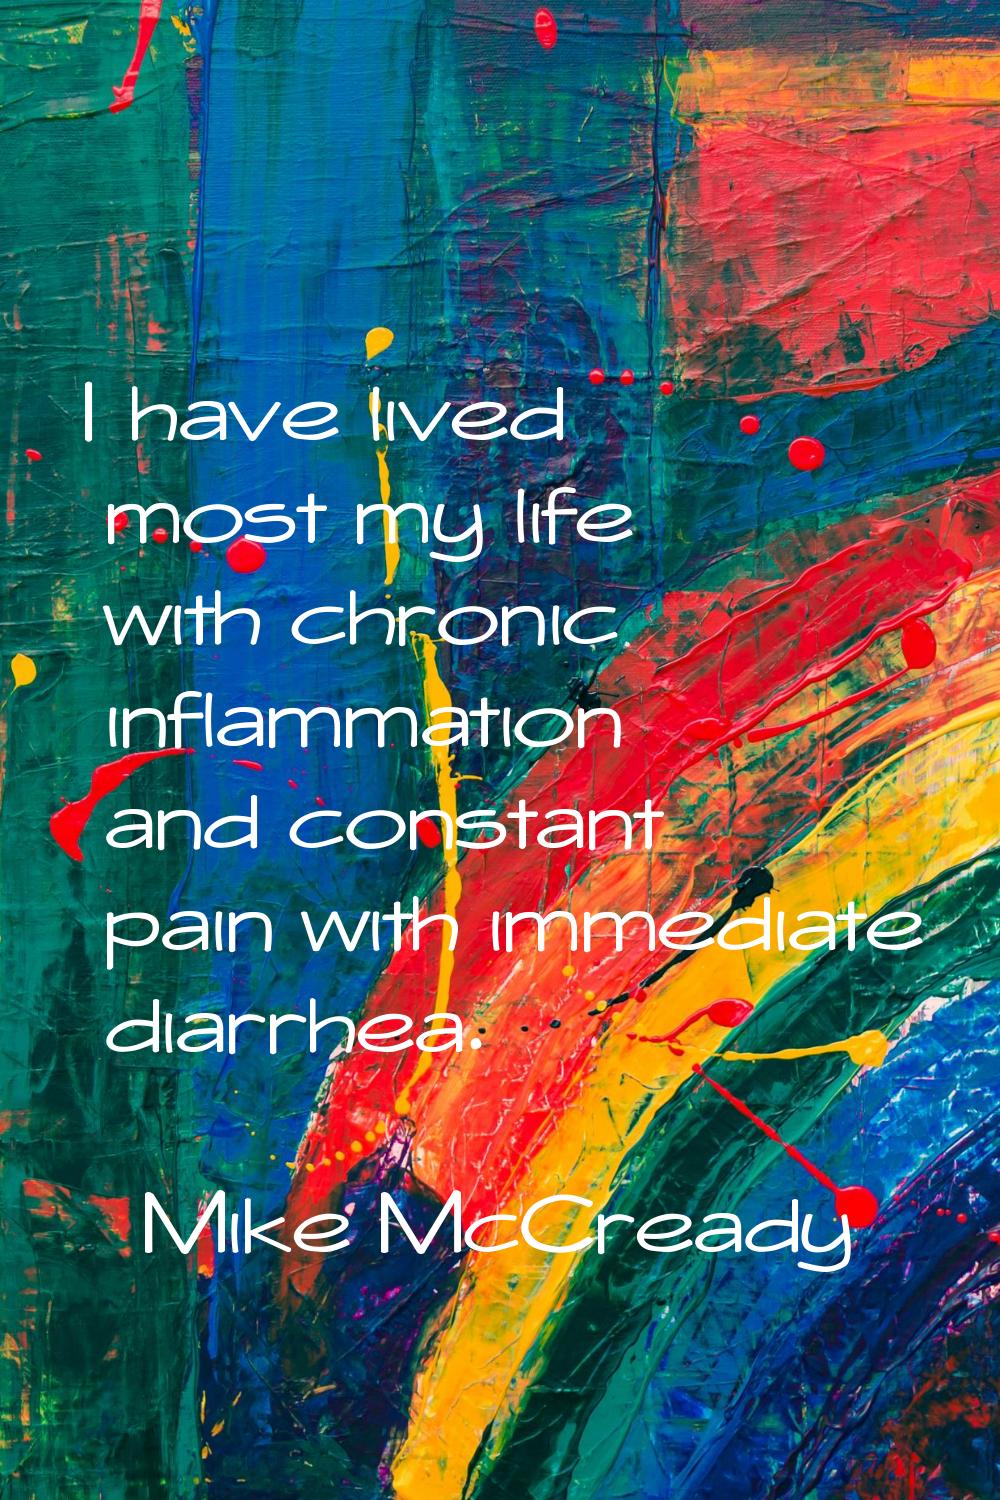 I have lived most my life with chronic inflammation and constant pain with immediate diarrhea.